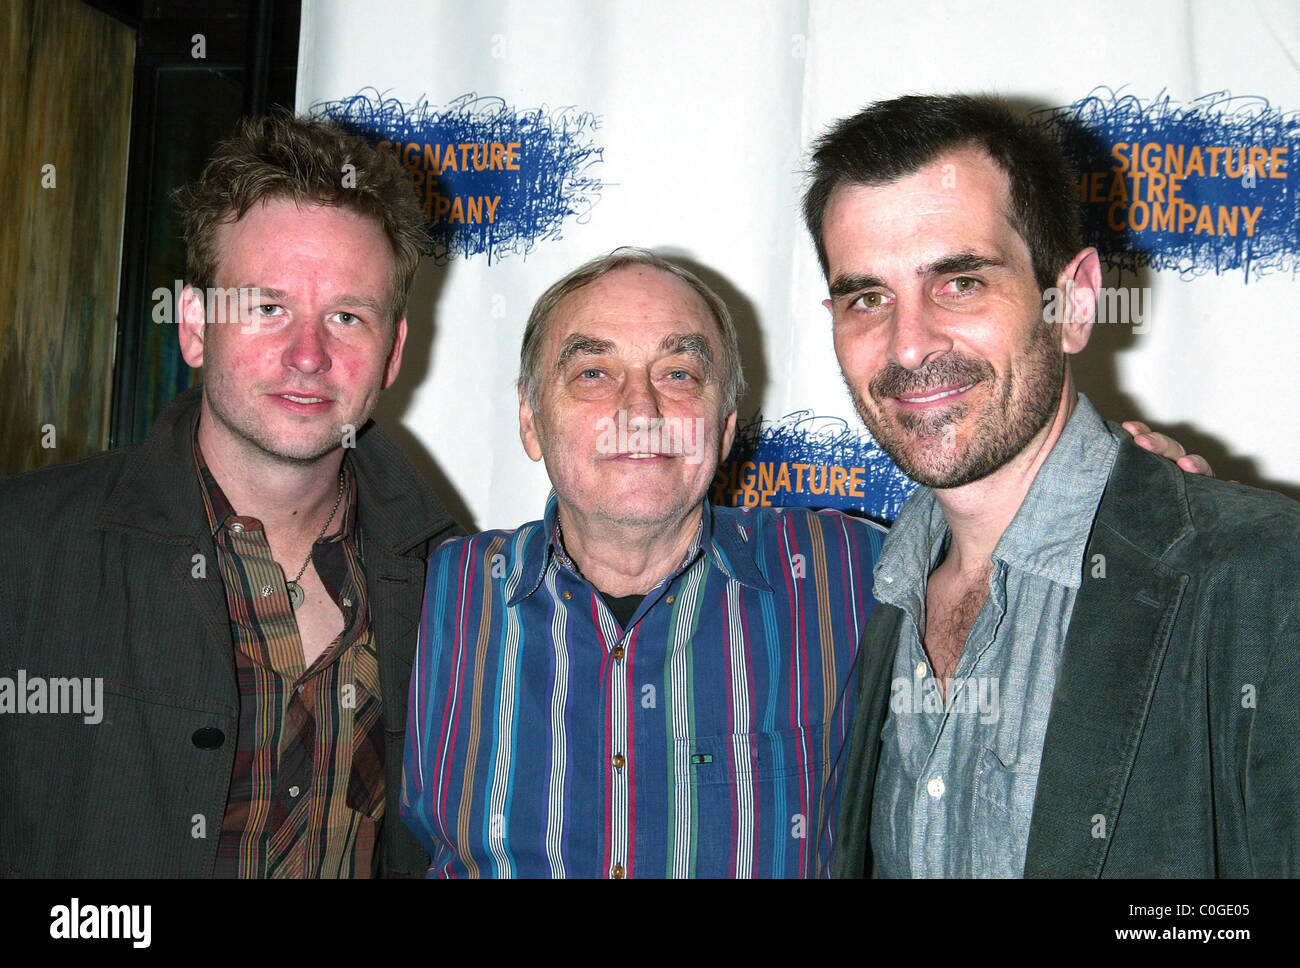 Dallas Roberts, Lanford Wilson and Ty Burrell at the after party for 'The Occupant' at the West Bank Cafe. New York City, USA - Stock Photo